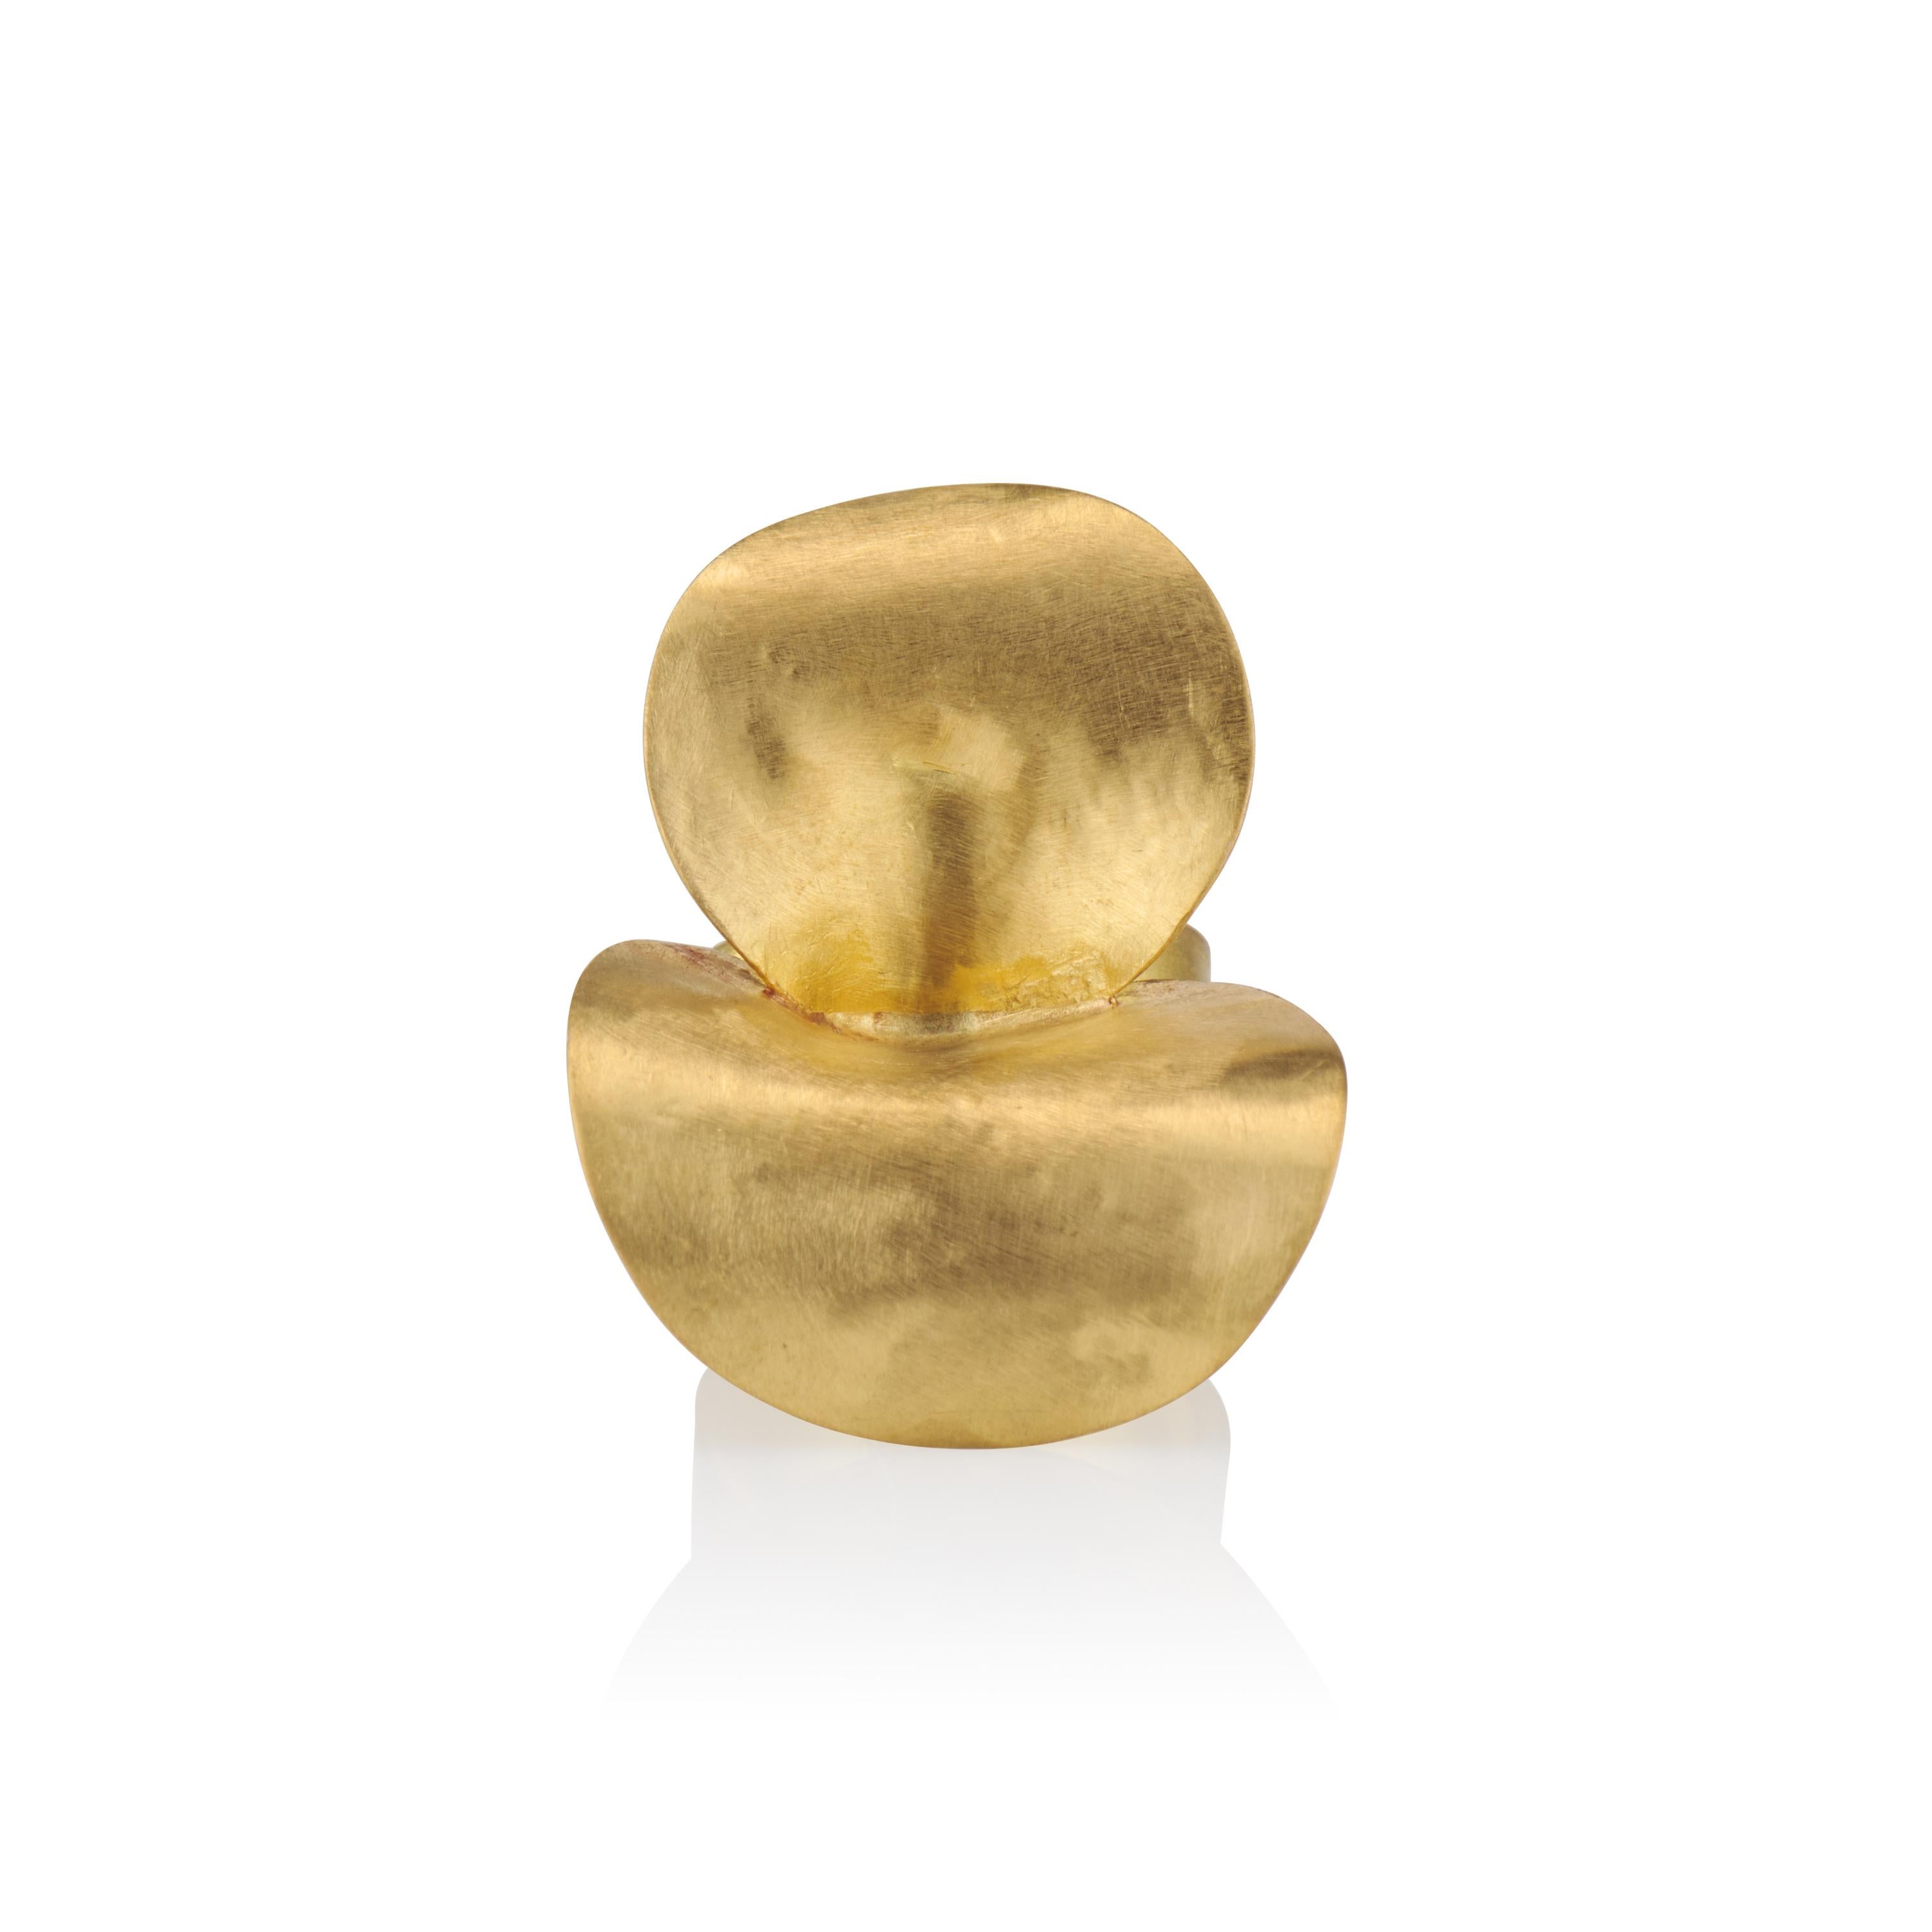 Sculptural, contemporary, singular, one-of-a-kind, floral blossom cocktail ring in 22 karat gold.  This handmade piece is a show stopper made for a collector with unusual and unapologetic taste in jewels.  This ring makes a statement.  
